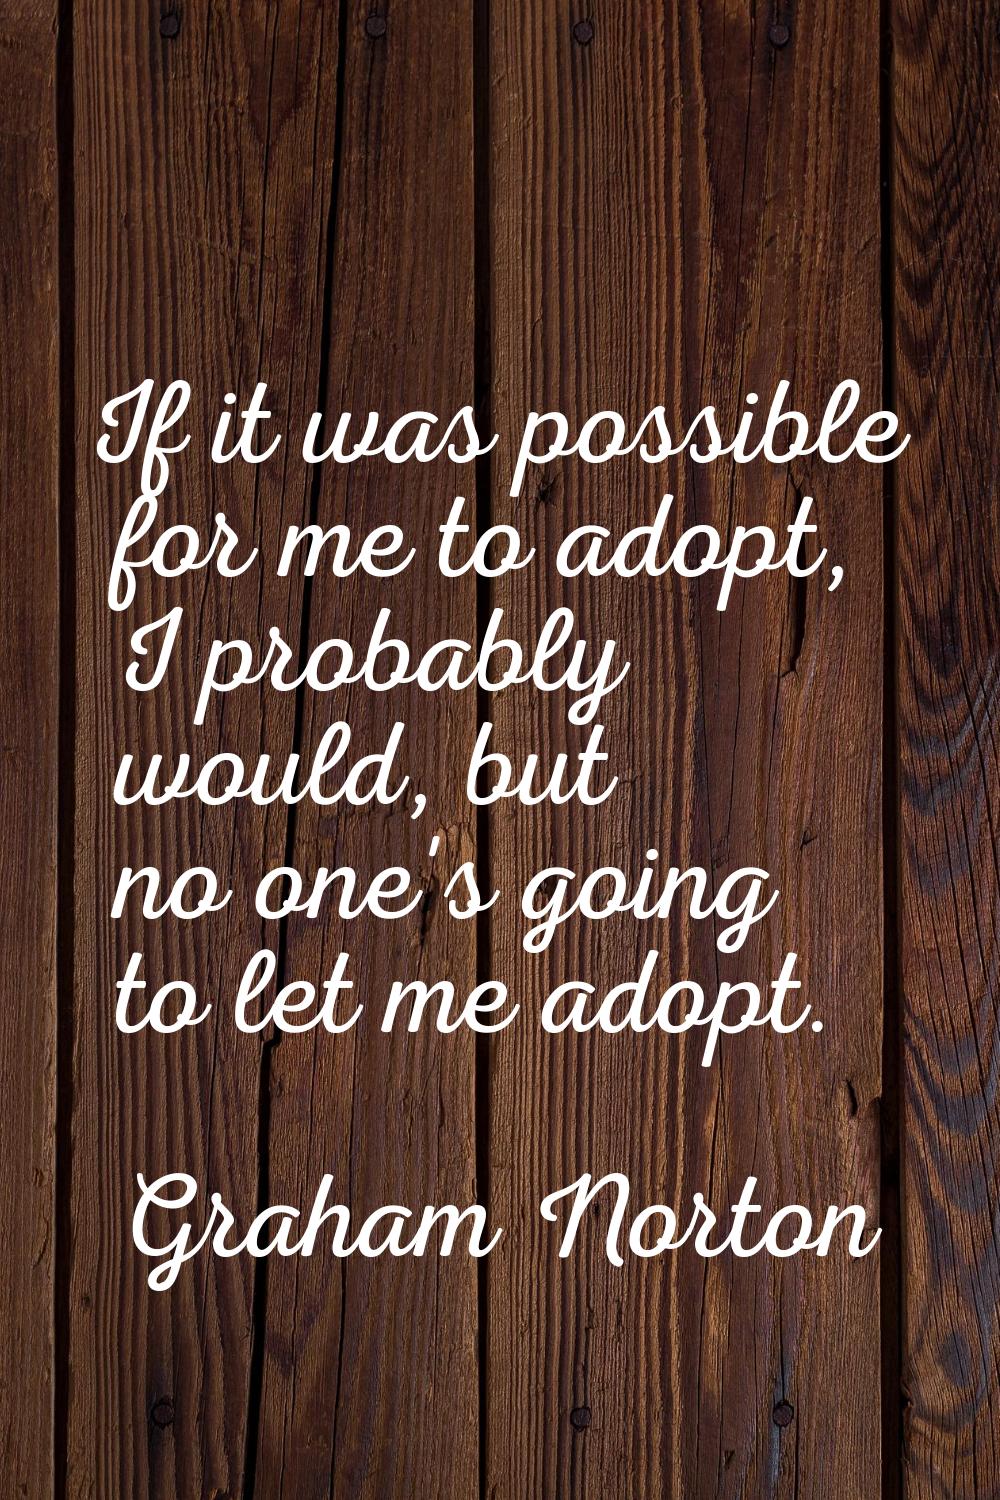 If it was possible for me to adopt, I probably would, but no one's going to let me adopt.